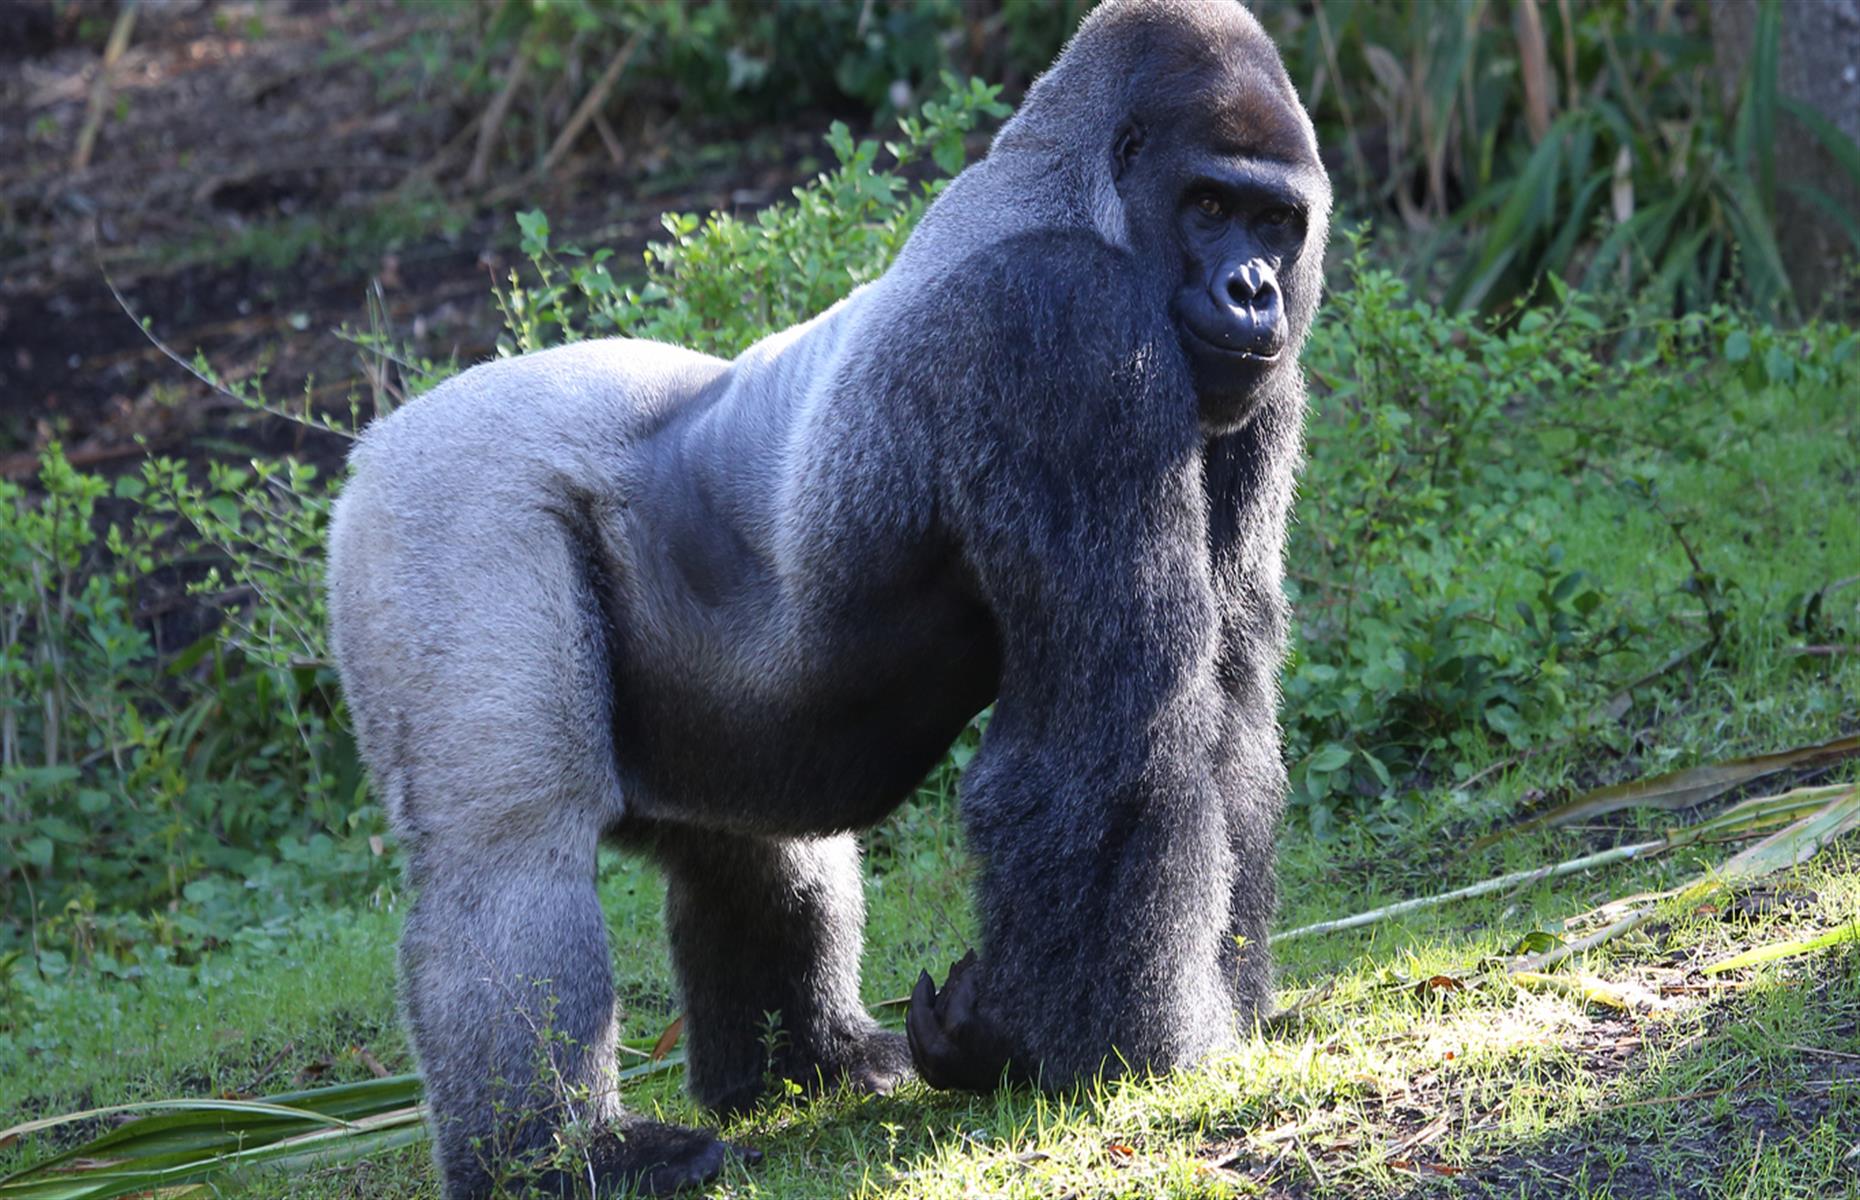 <p>Mountain gorillas can only be found in the Bwindi Impenetrable National Park and along the dormant volcanic Virunga mountain range that stretches into Rwanda and the Democratic Republic of the Congo. In addition to shrinking habitats, the gorillas are likely to be impacted by ripple effects of climate change as humans encroach on their territory. As the dry season gets longer and more severe, people will go further into the forest in search of fresh water for drinking and agriculture.</p>